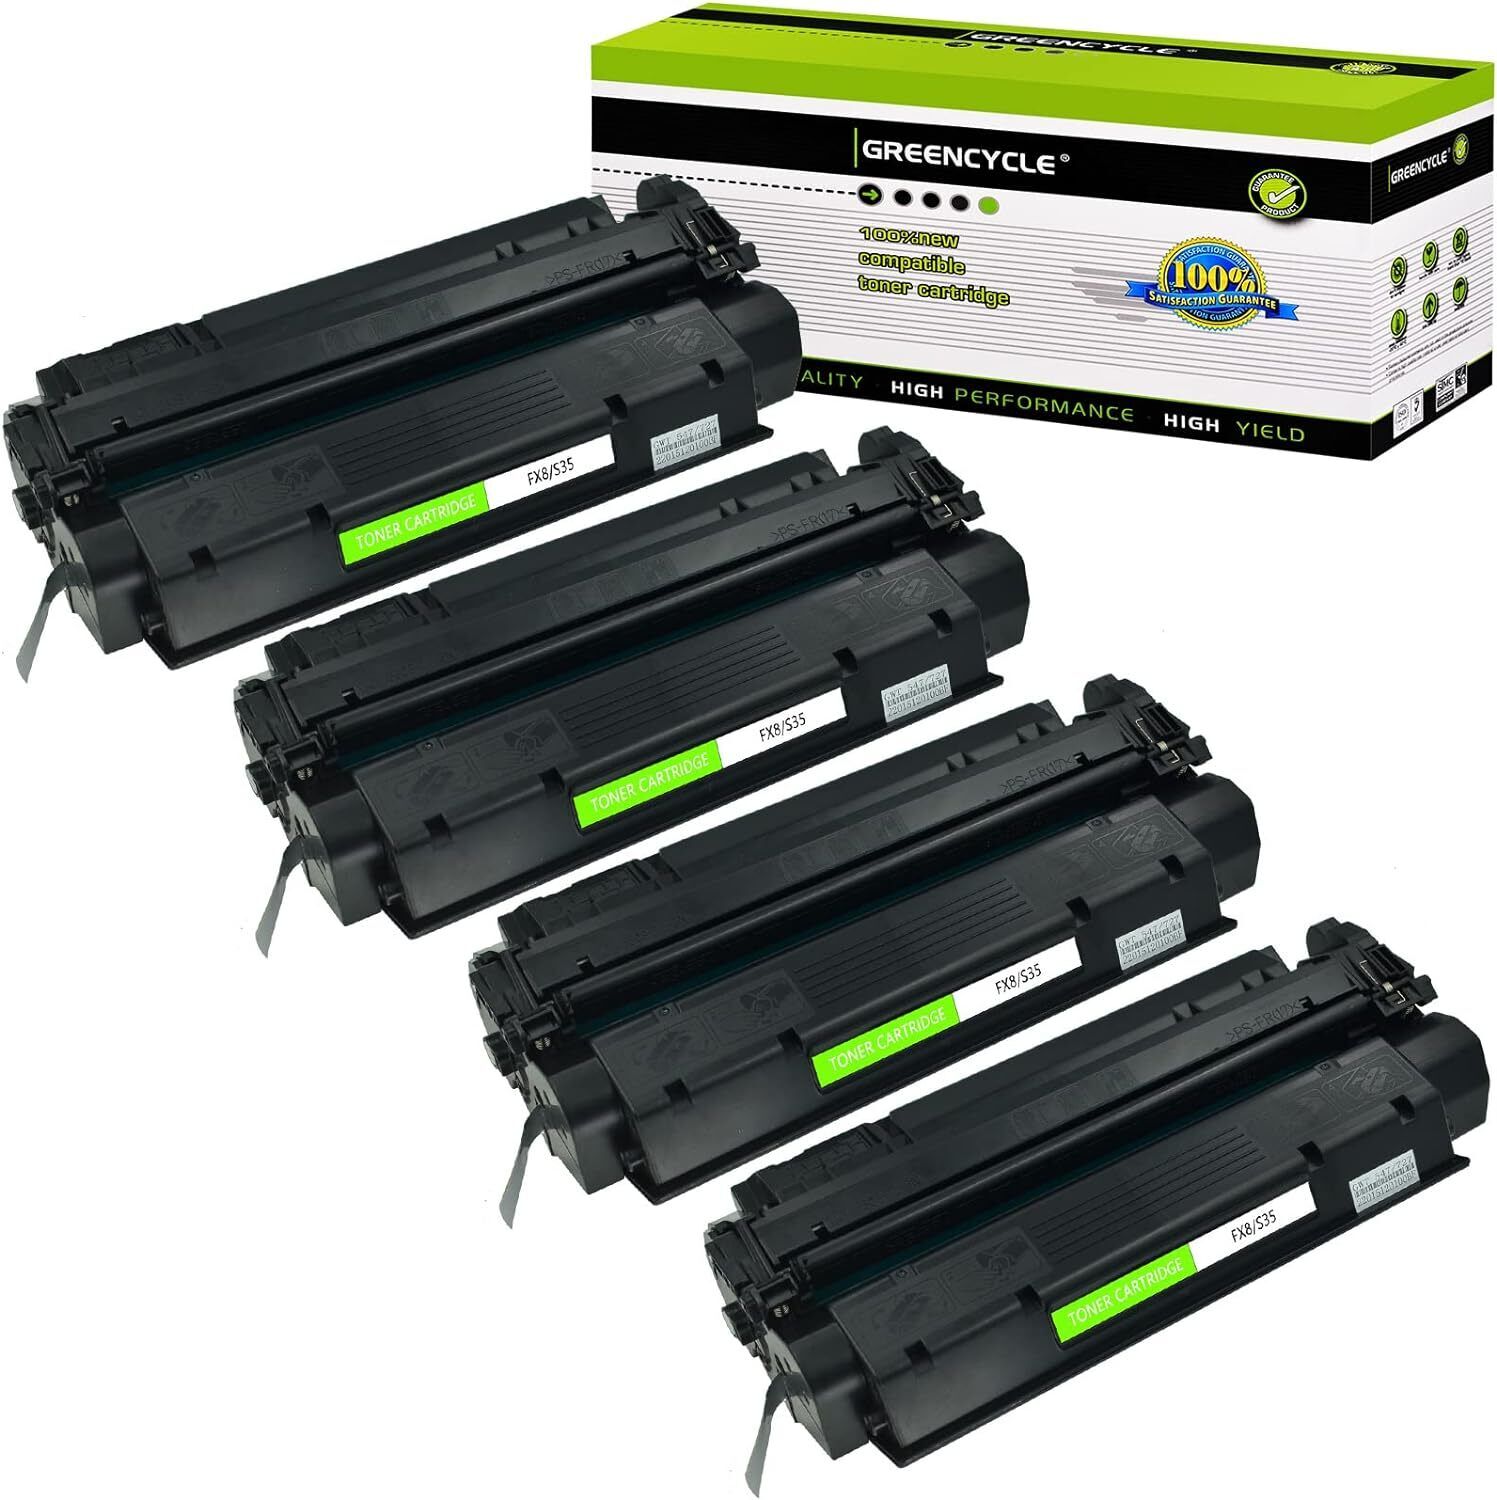 GREENCYCLE 4× S35 S-35 Toner Cartridge Compatible for Canon imageCLASS D340 D360